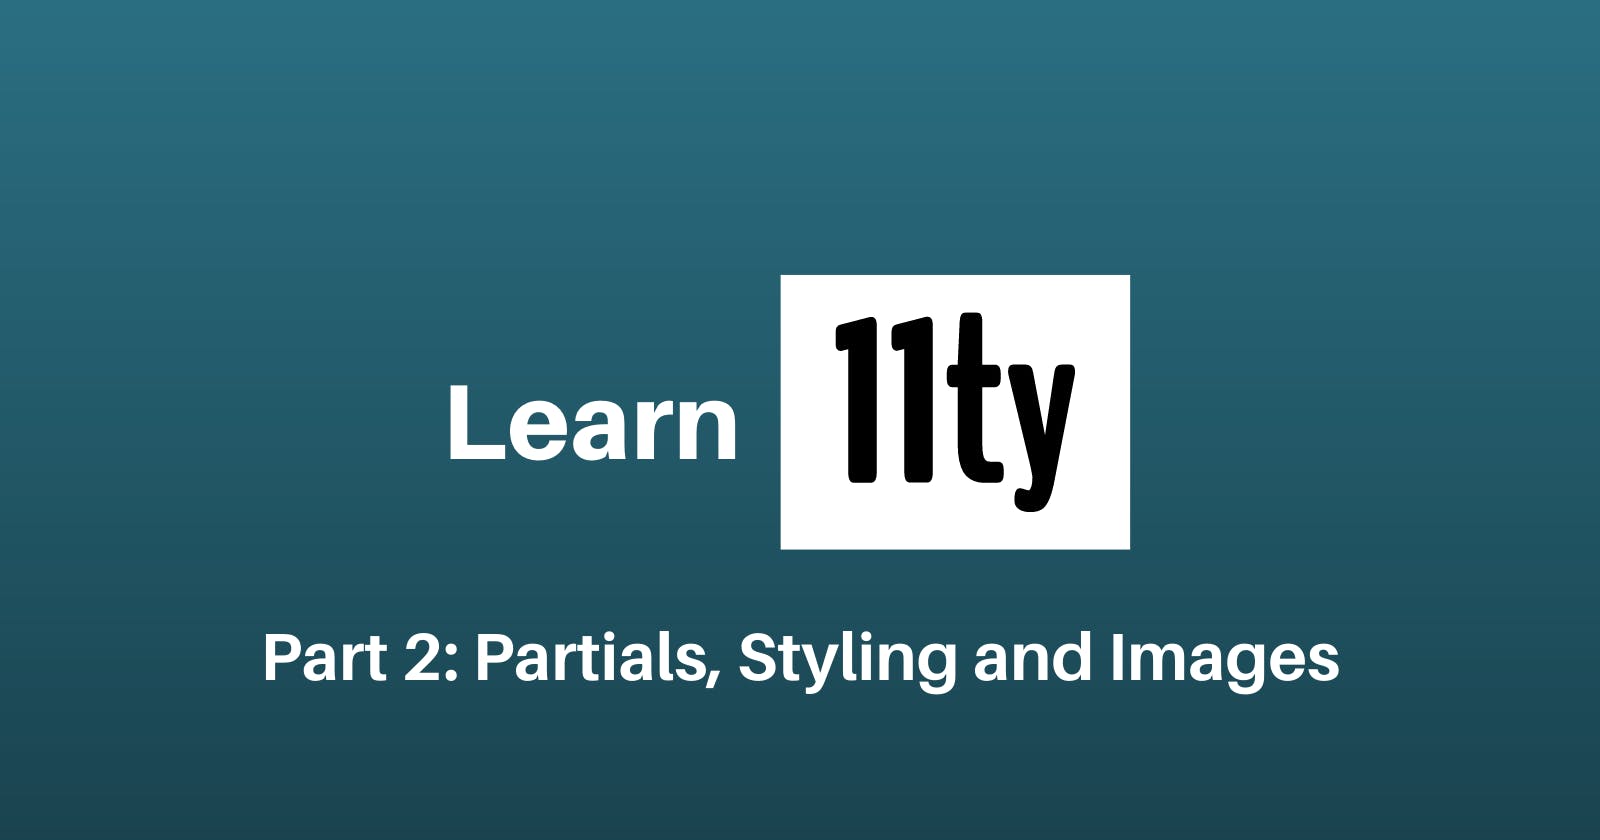 Let's Learn 11ty Part 2